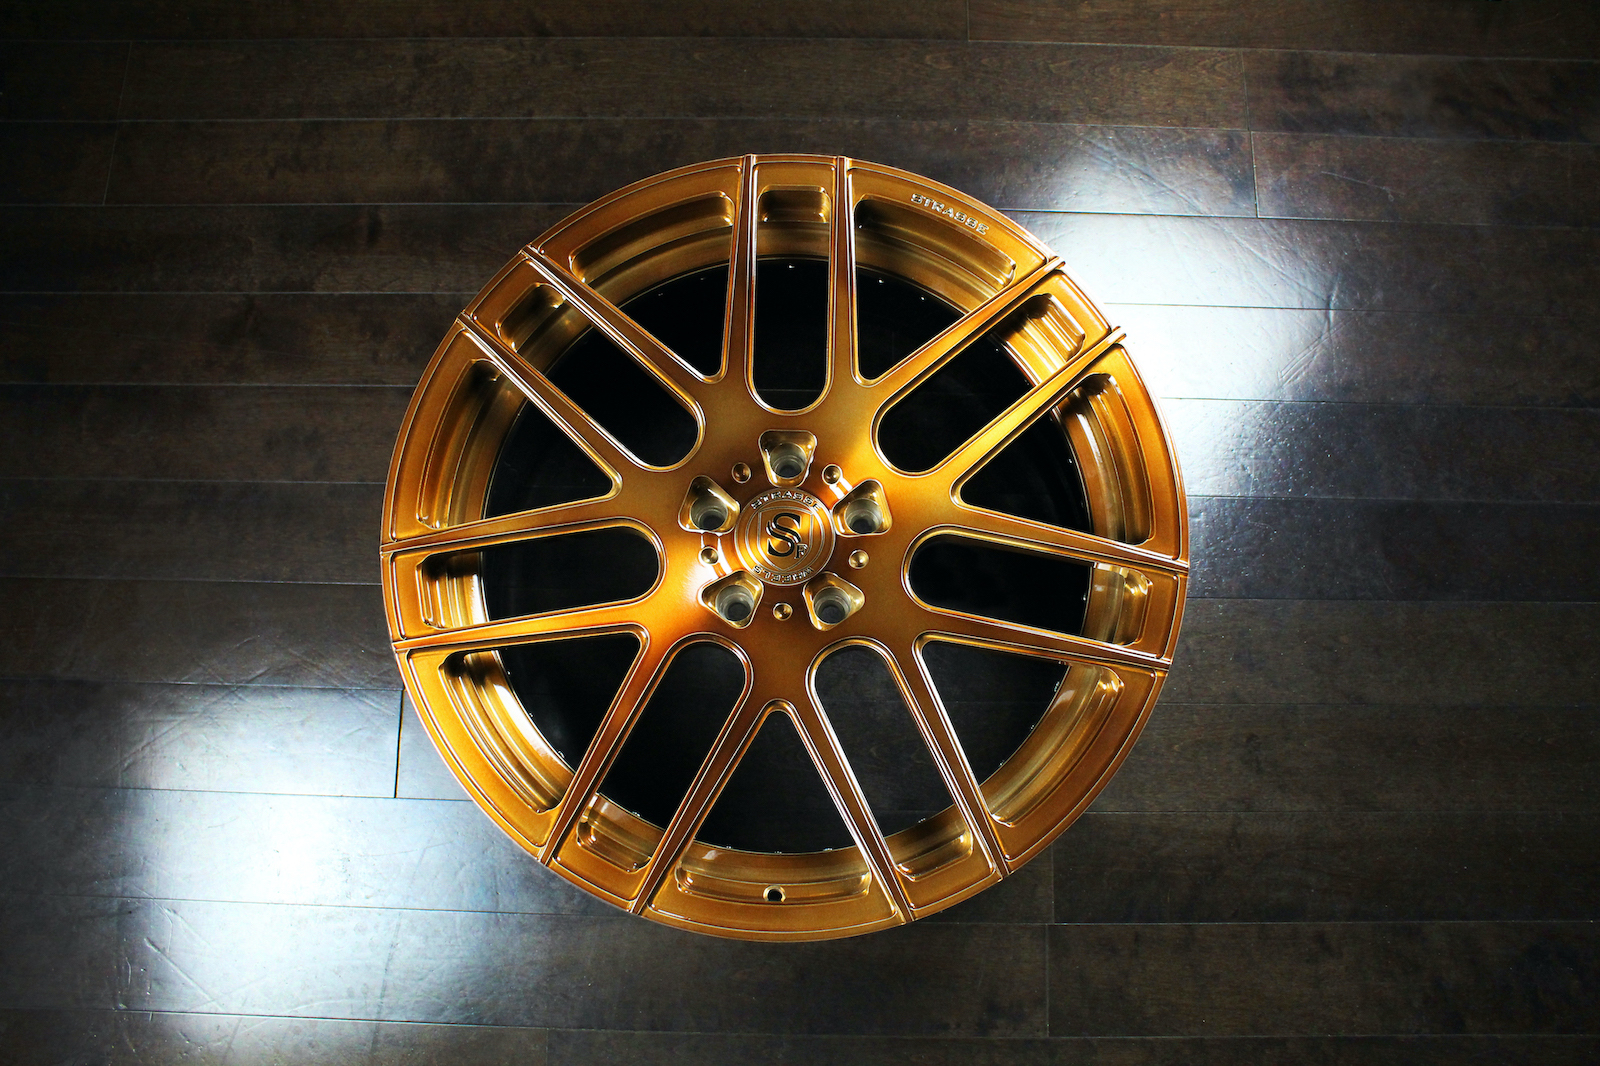 Strasse SM7 DEEP CONCAVE DUOBLOCK Forged Wheels